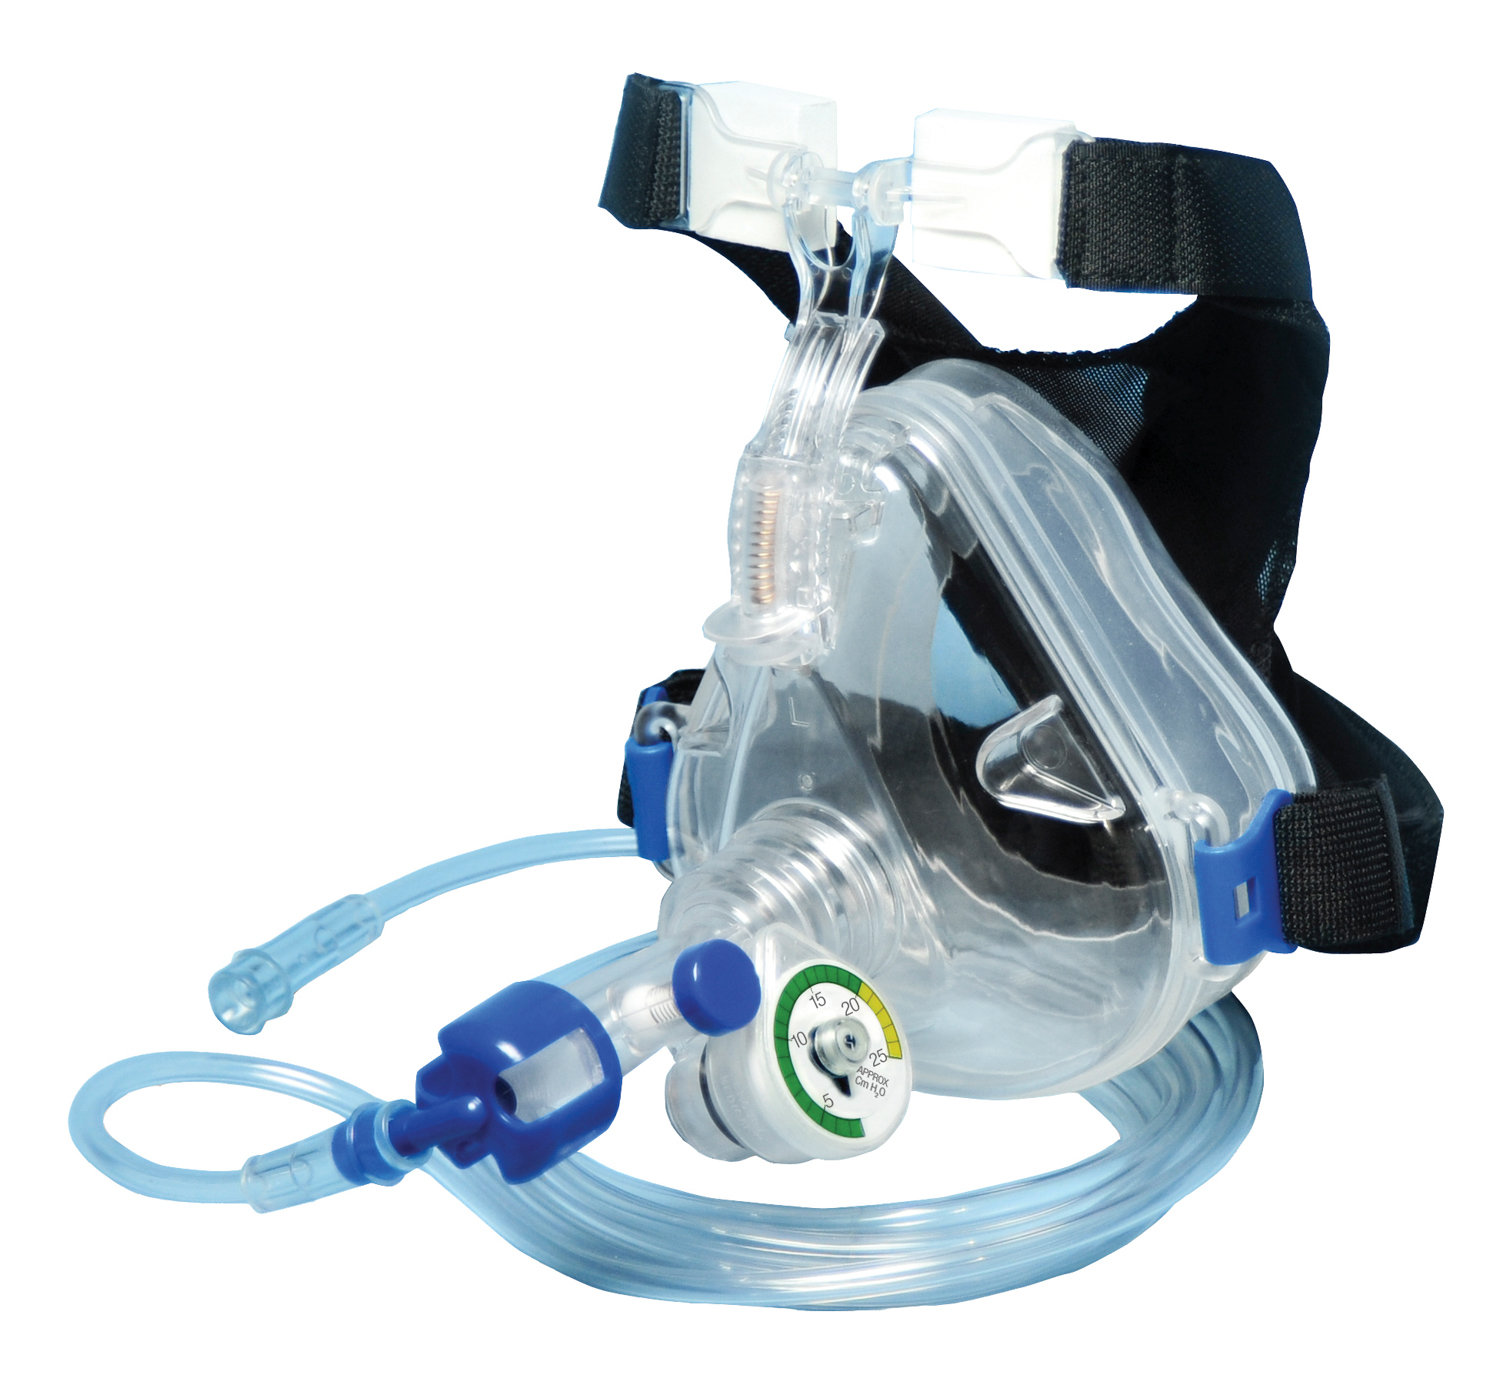 Mercury Medical ramped up production of its Flow-Safe II CPAP mask thanks to the efforts of U.S. Rep. Eliot Engel to reactivate a Malaysian plant shut down because of the coronavirus pandemic. The Florida-based company offered its masks as alternatives to ventilators, for those suffering later stages of COVID-19.